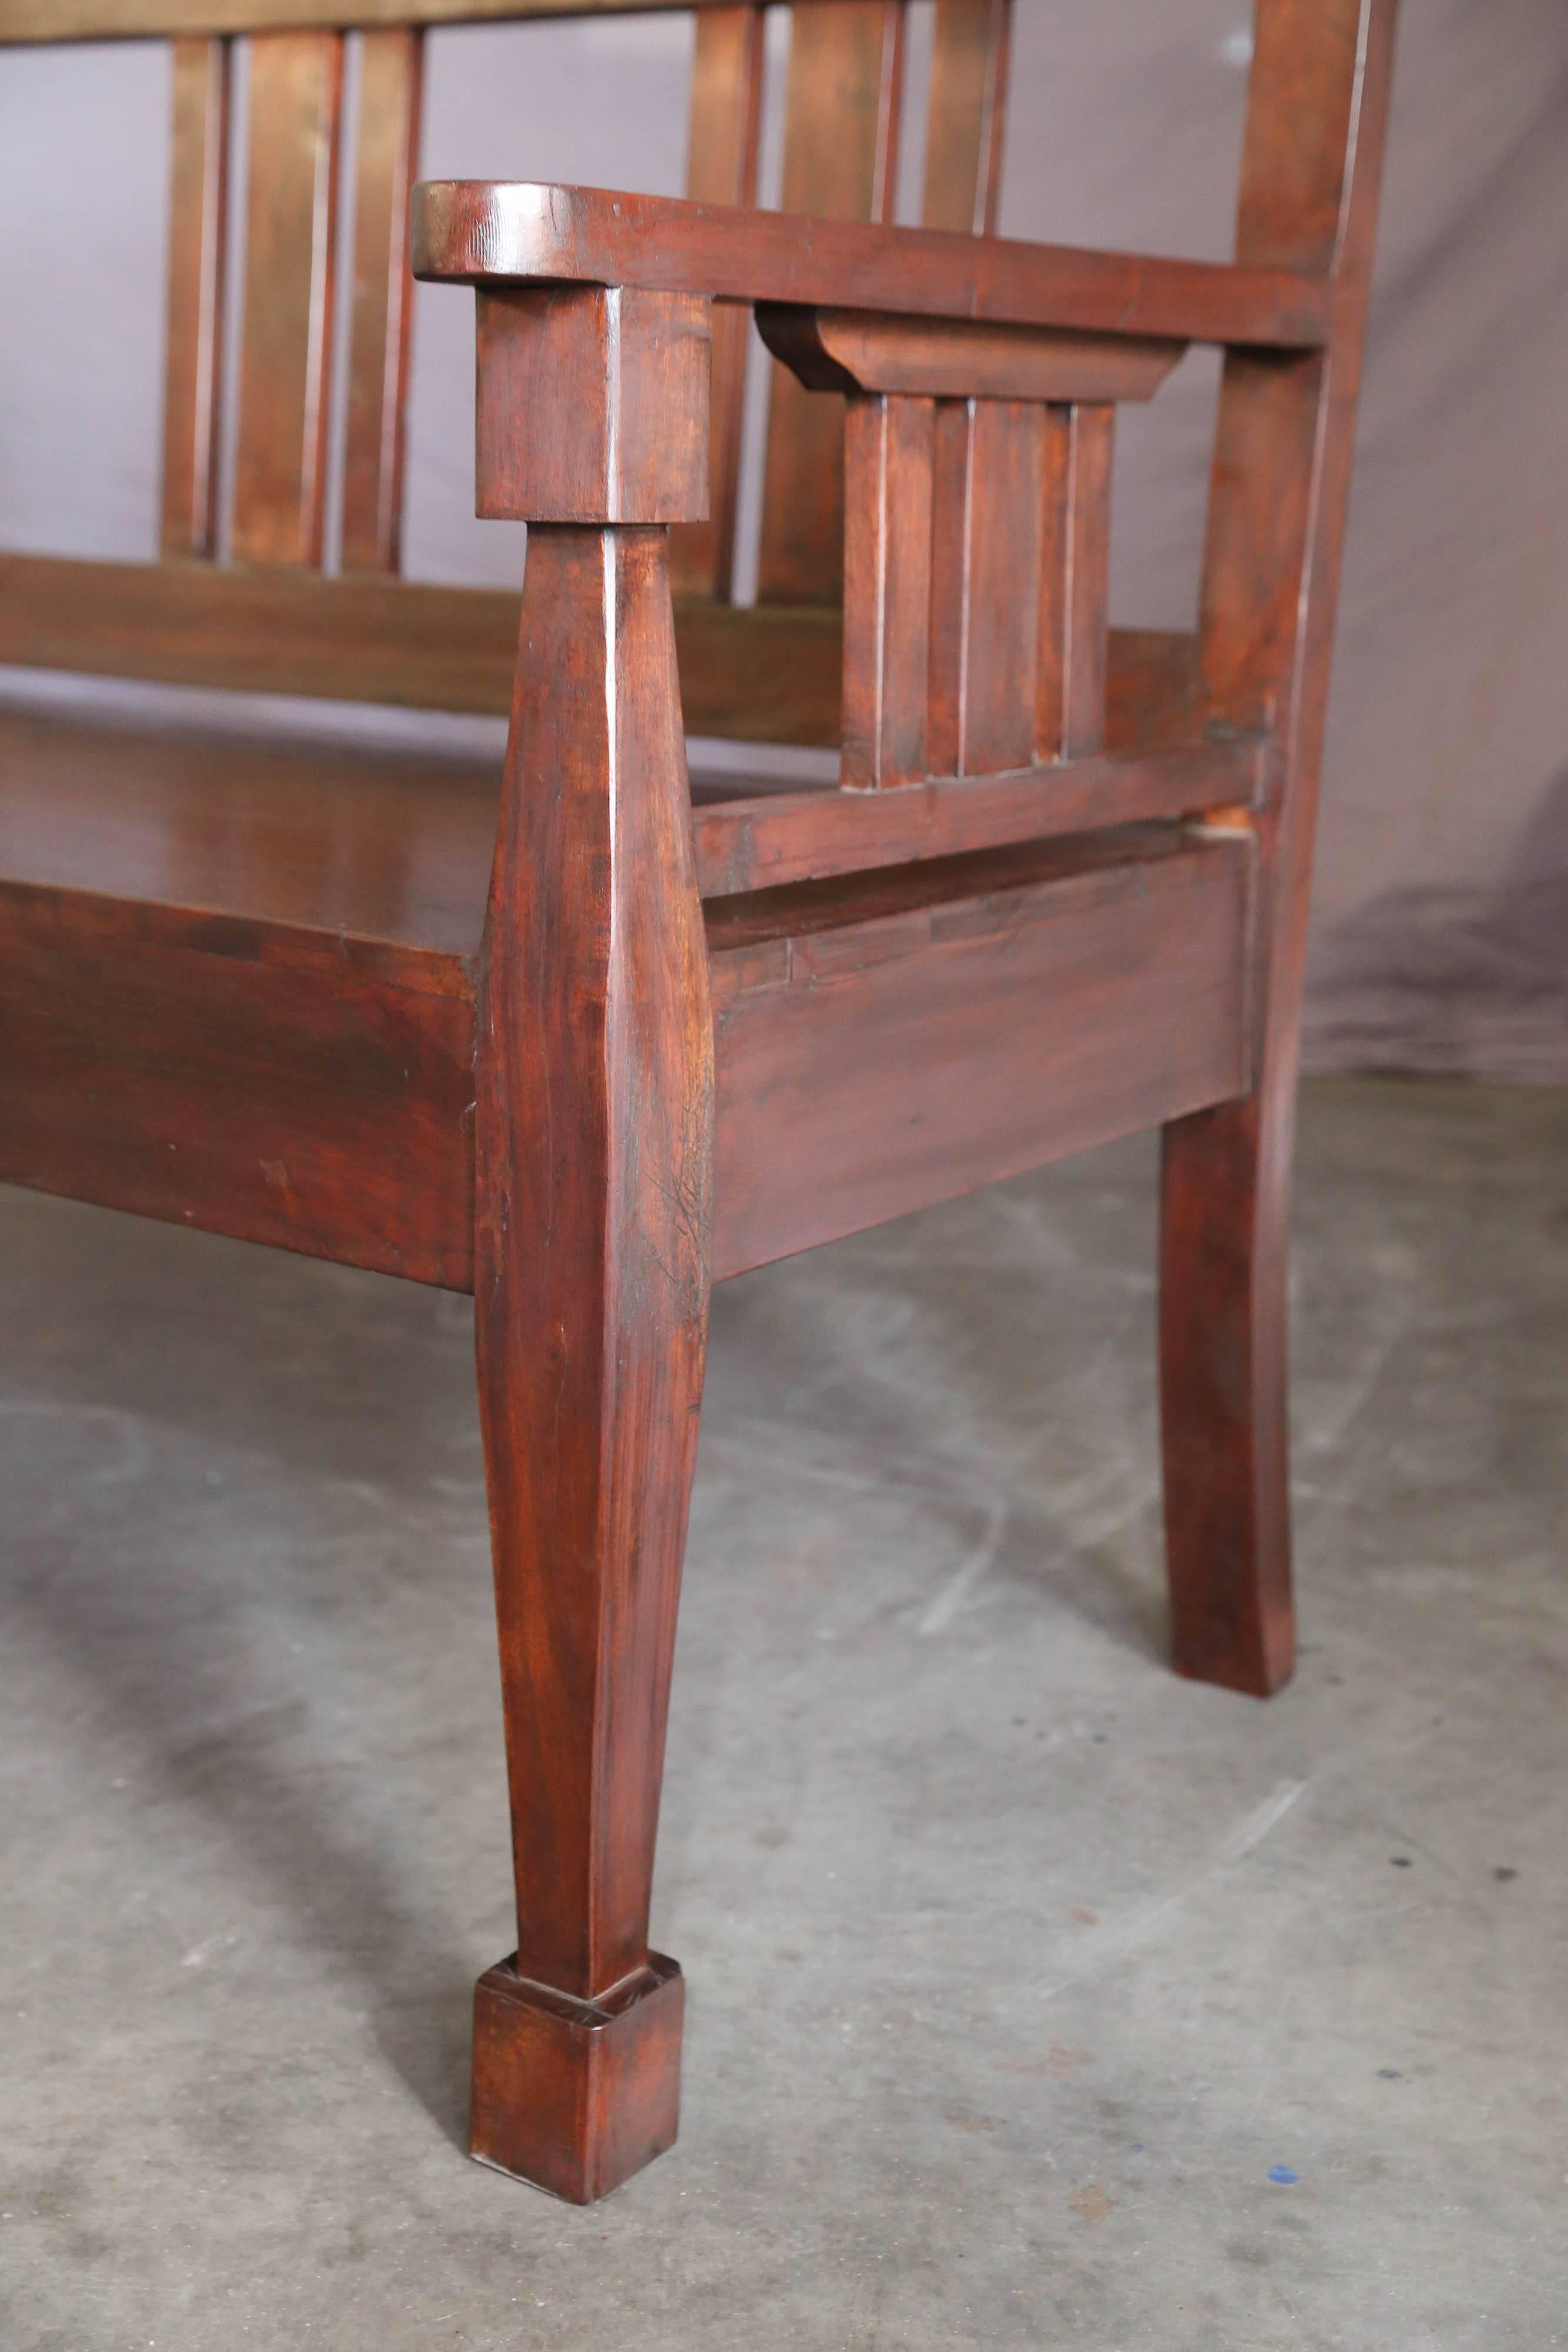 Anglo Raj Late 19th Century Solid Teak Wood Typical Tea Plantation Bench from Darjeeling For Sale